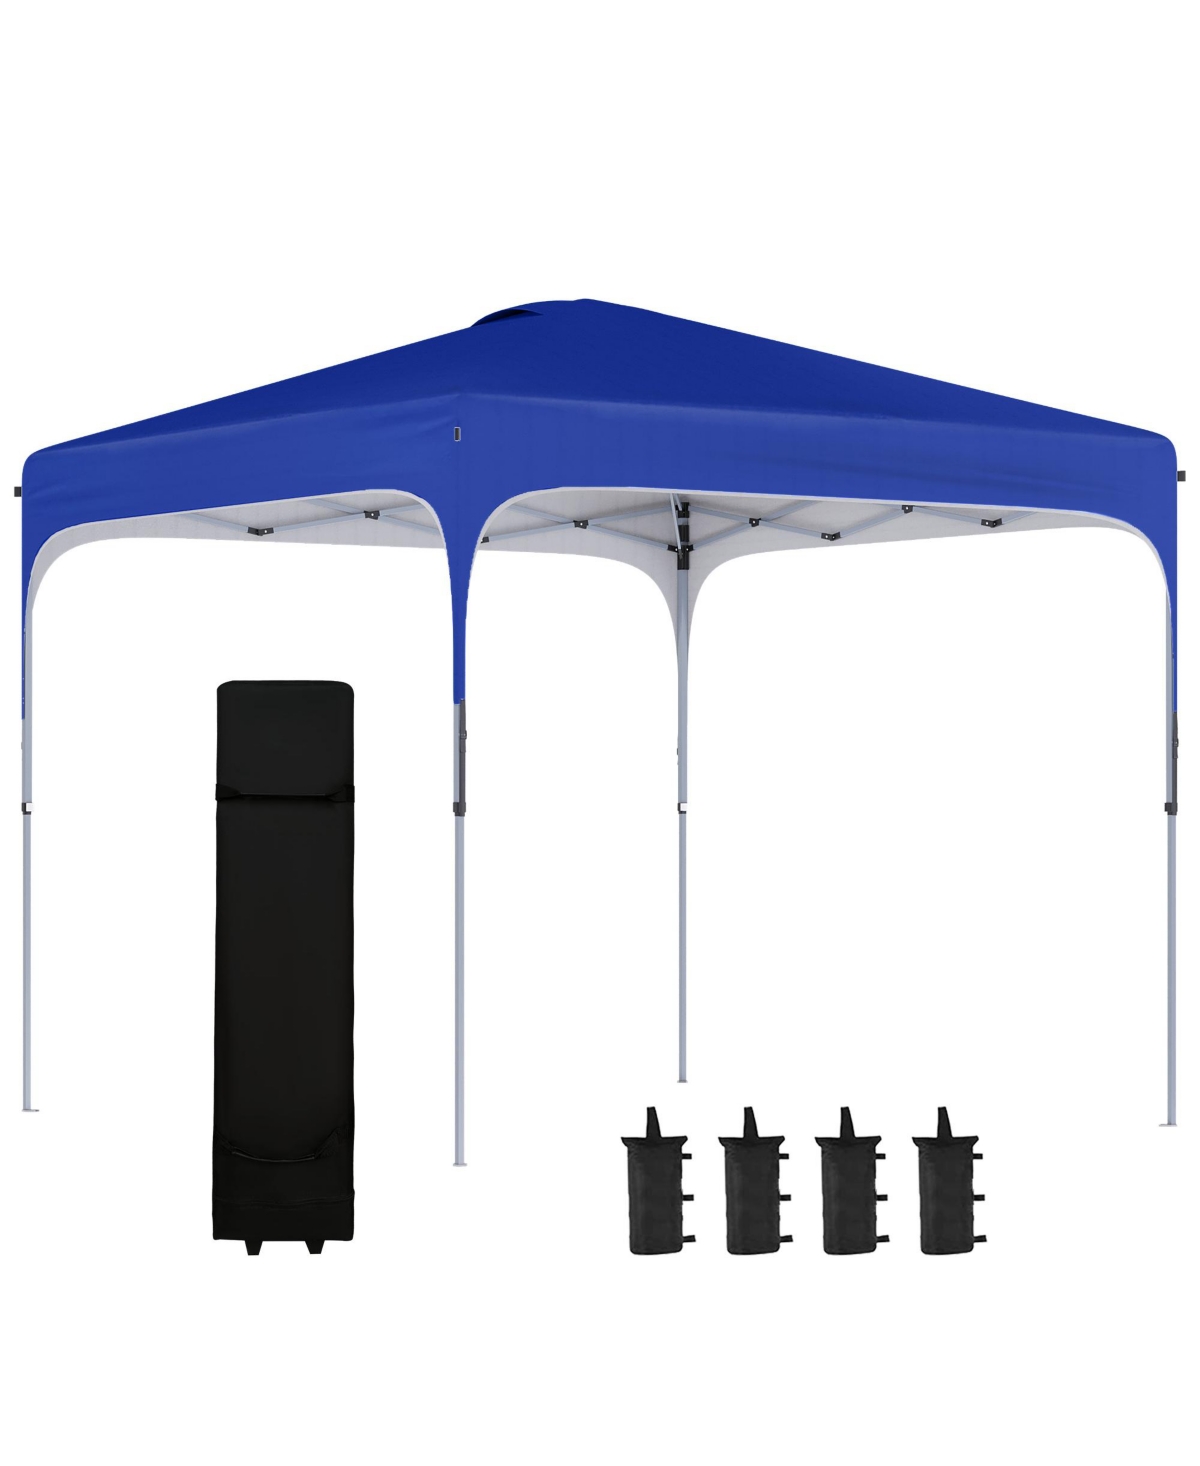 8' x 8' Pop Up Canopy Tent with Wheeled Carry Bag and 4 Sand Bags, Instant Sun Shelter, Tents for Parties, Height Adjustable, for Outdoor, Ga